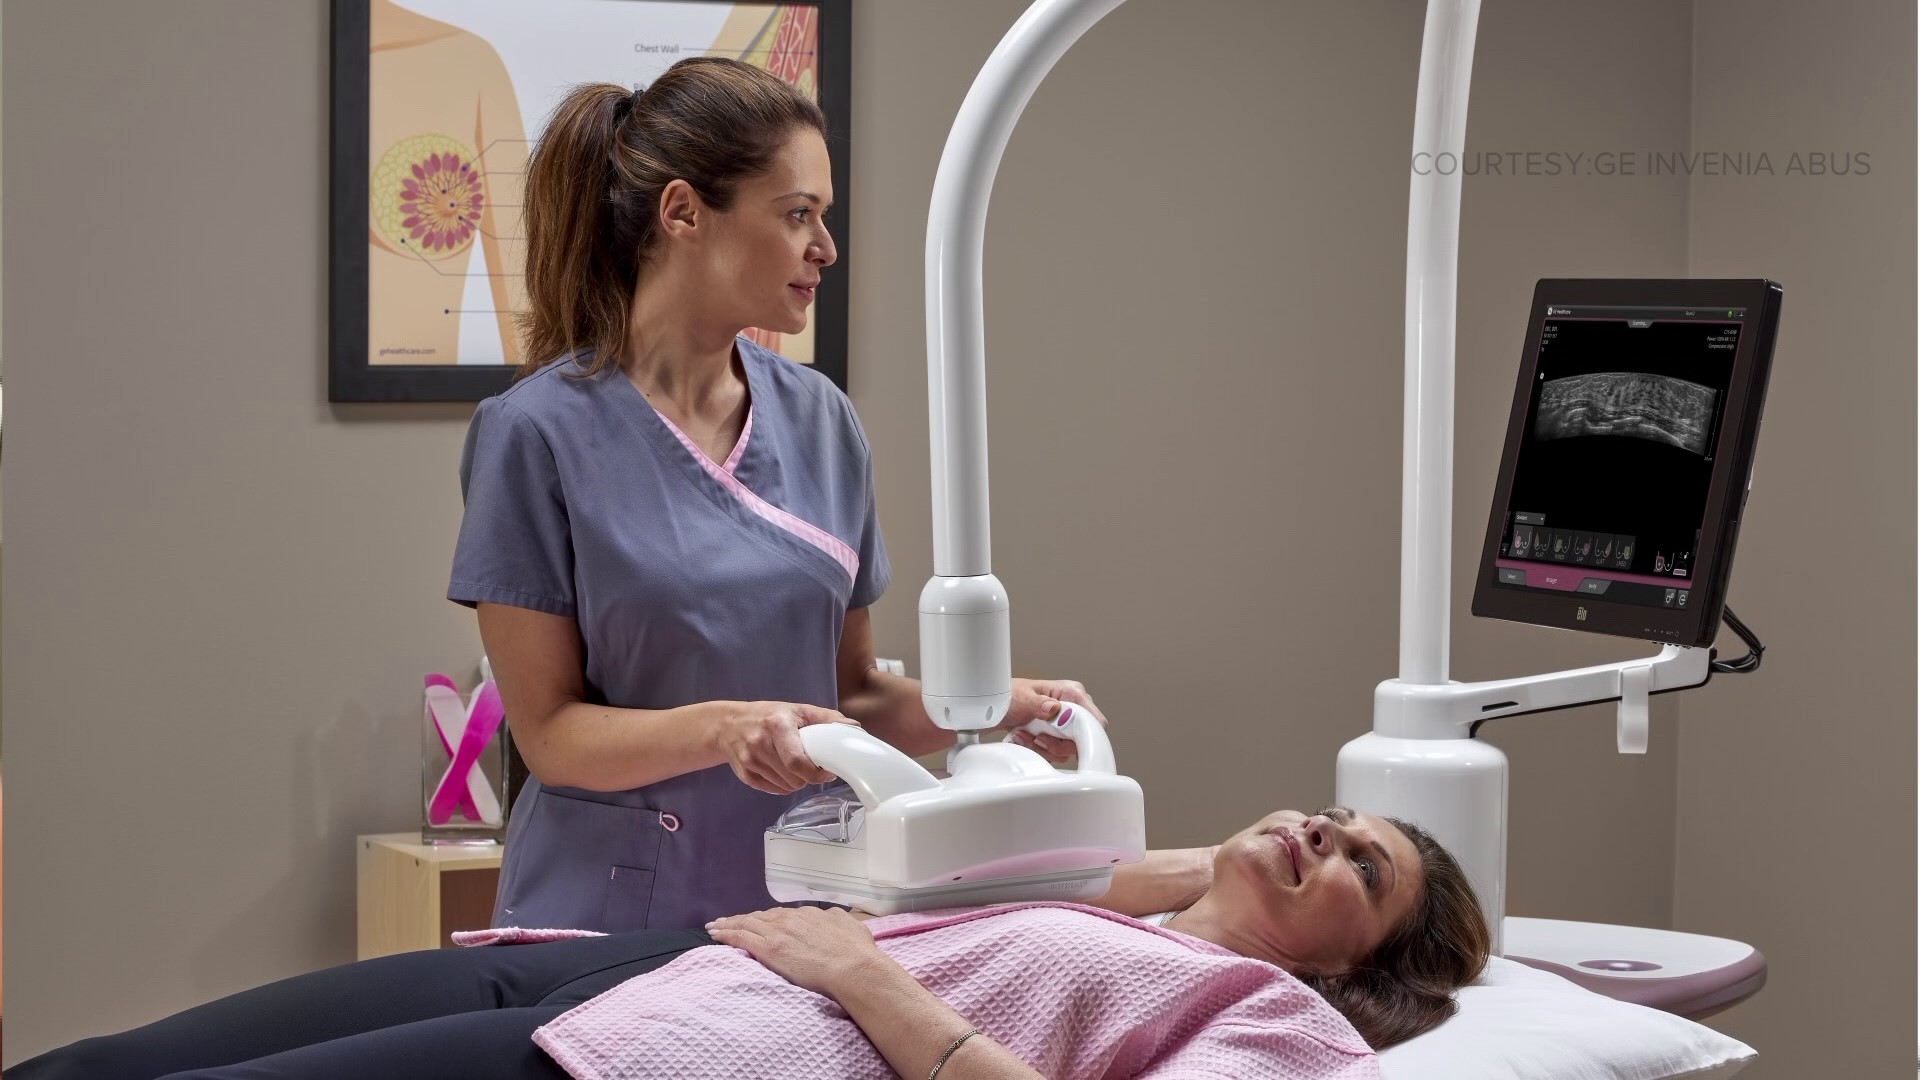 The technology is a new alternative to mammograms when checking for breast cancer.